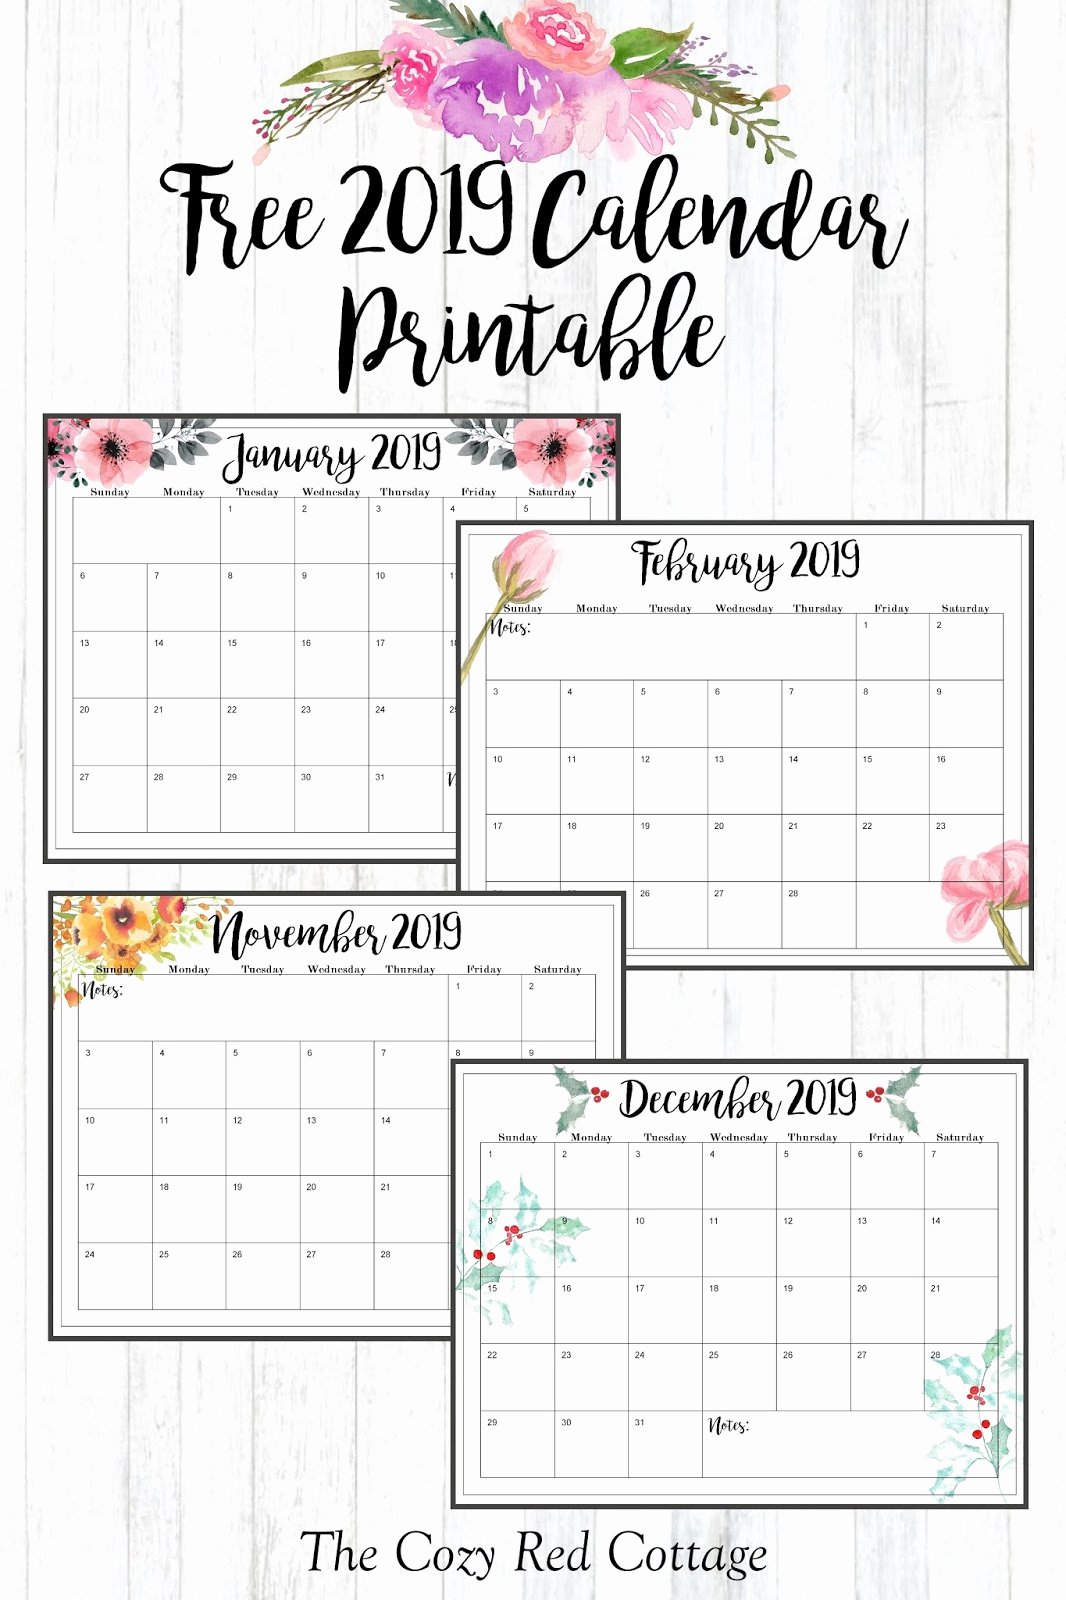 Free 2019 Calendar Template Best Of the Cozy Red Cottage Free 2019 Calendar Printable